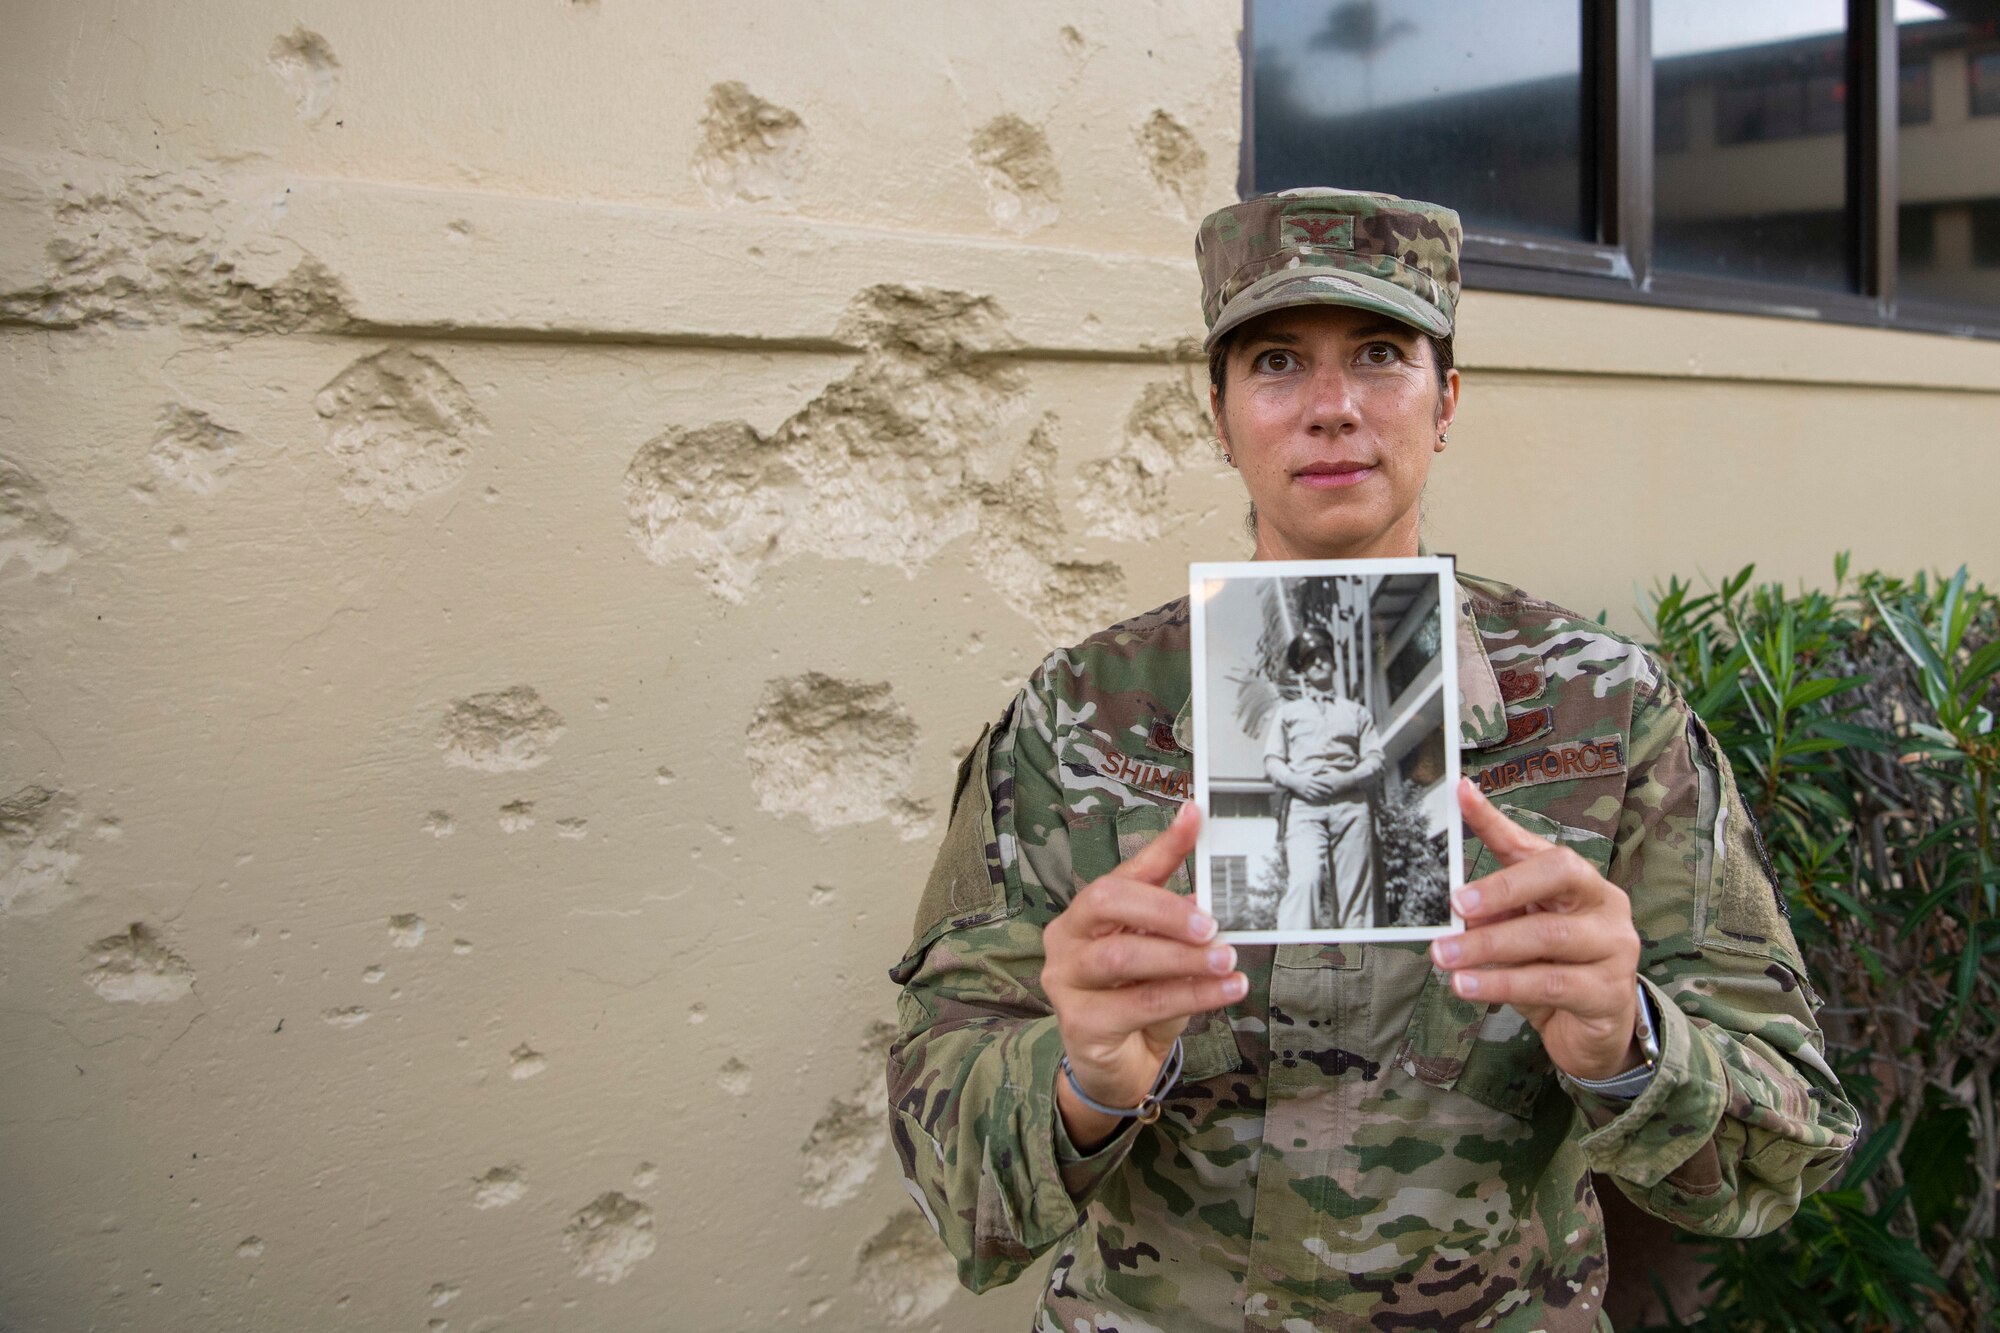 Col. Athanasia Shinas holds a photo of her grandfather, Private Ralph Yeager, in front of the bullet- and shrapnel-marked facade of the Pacific Air Forces building in Hawaii.